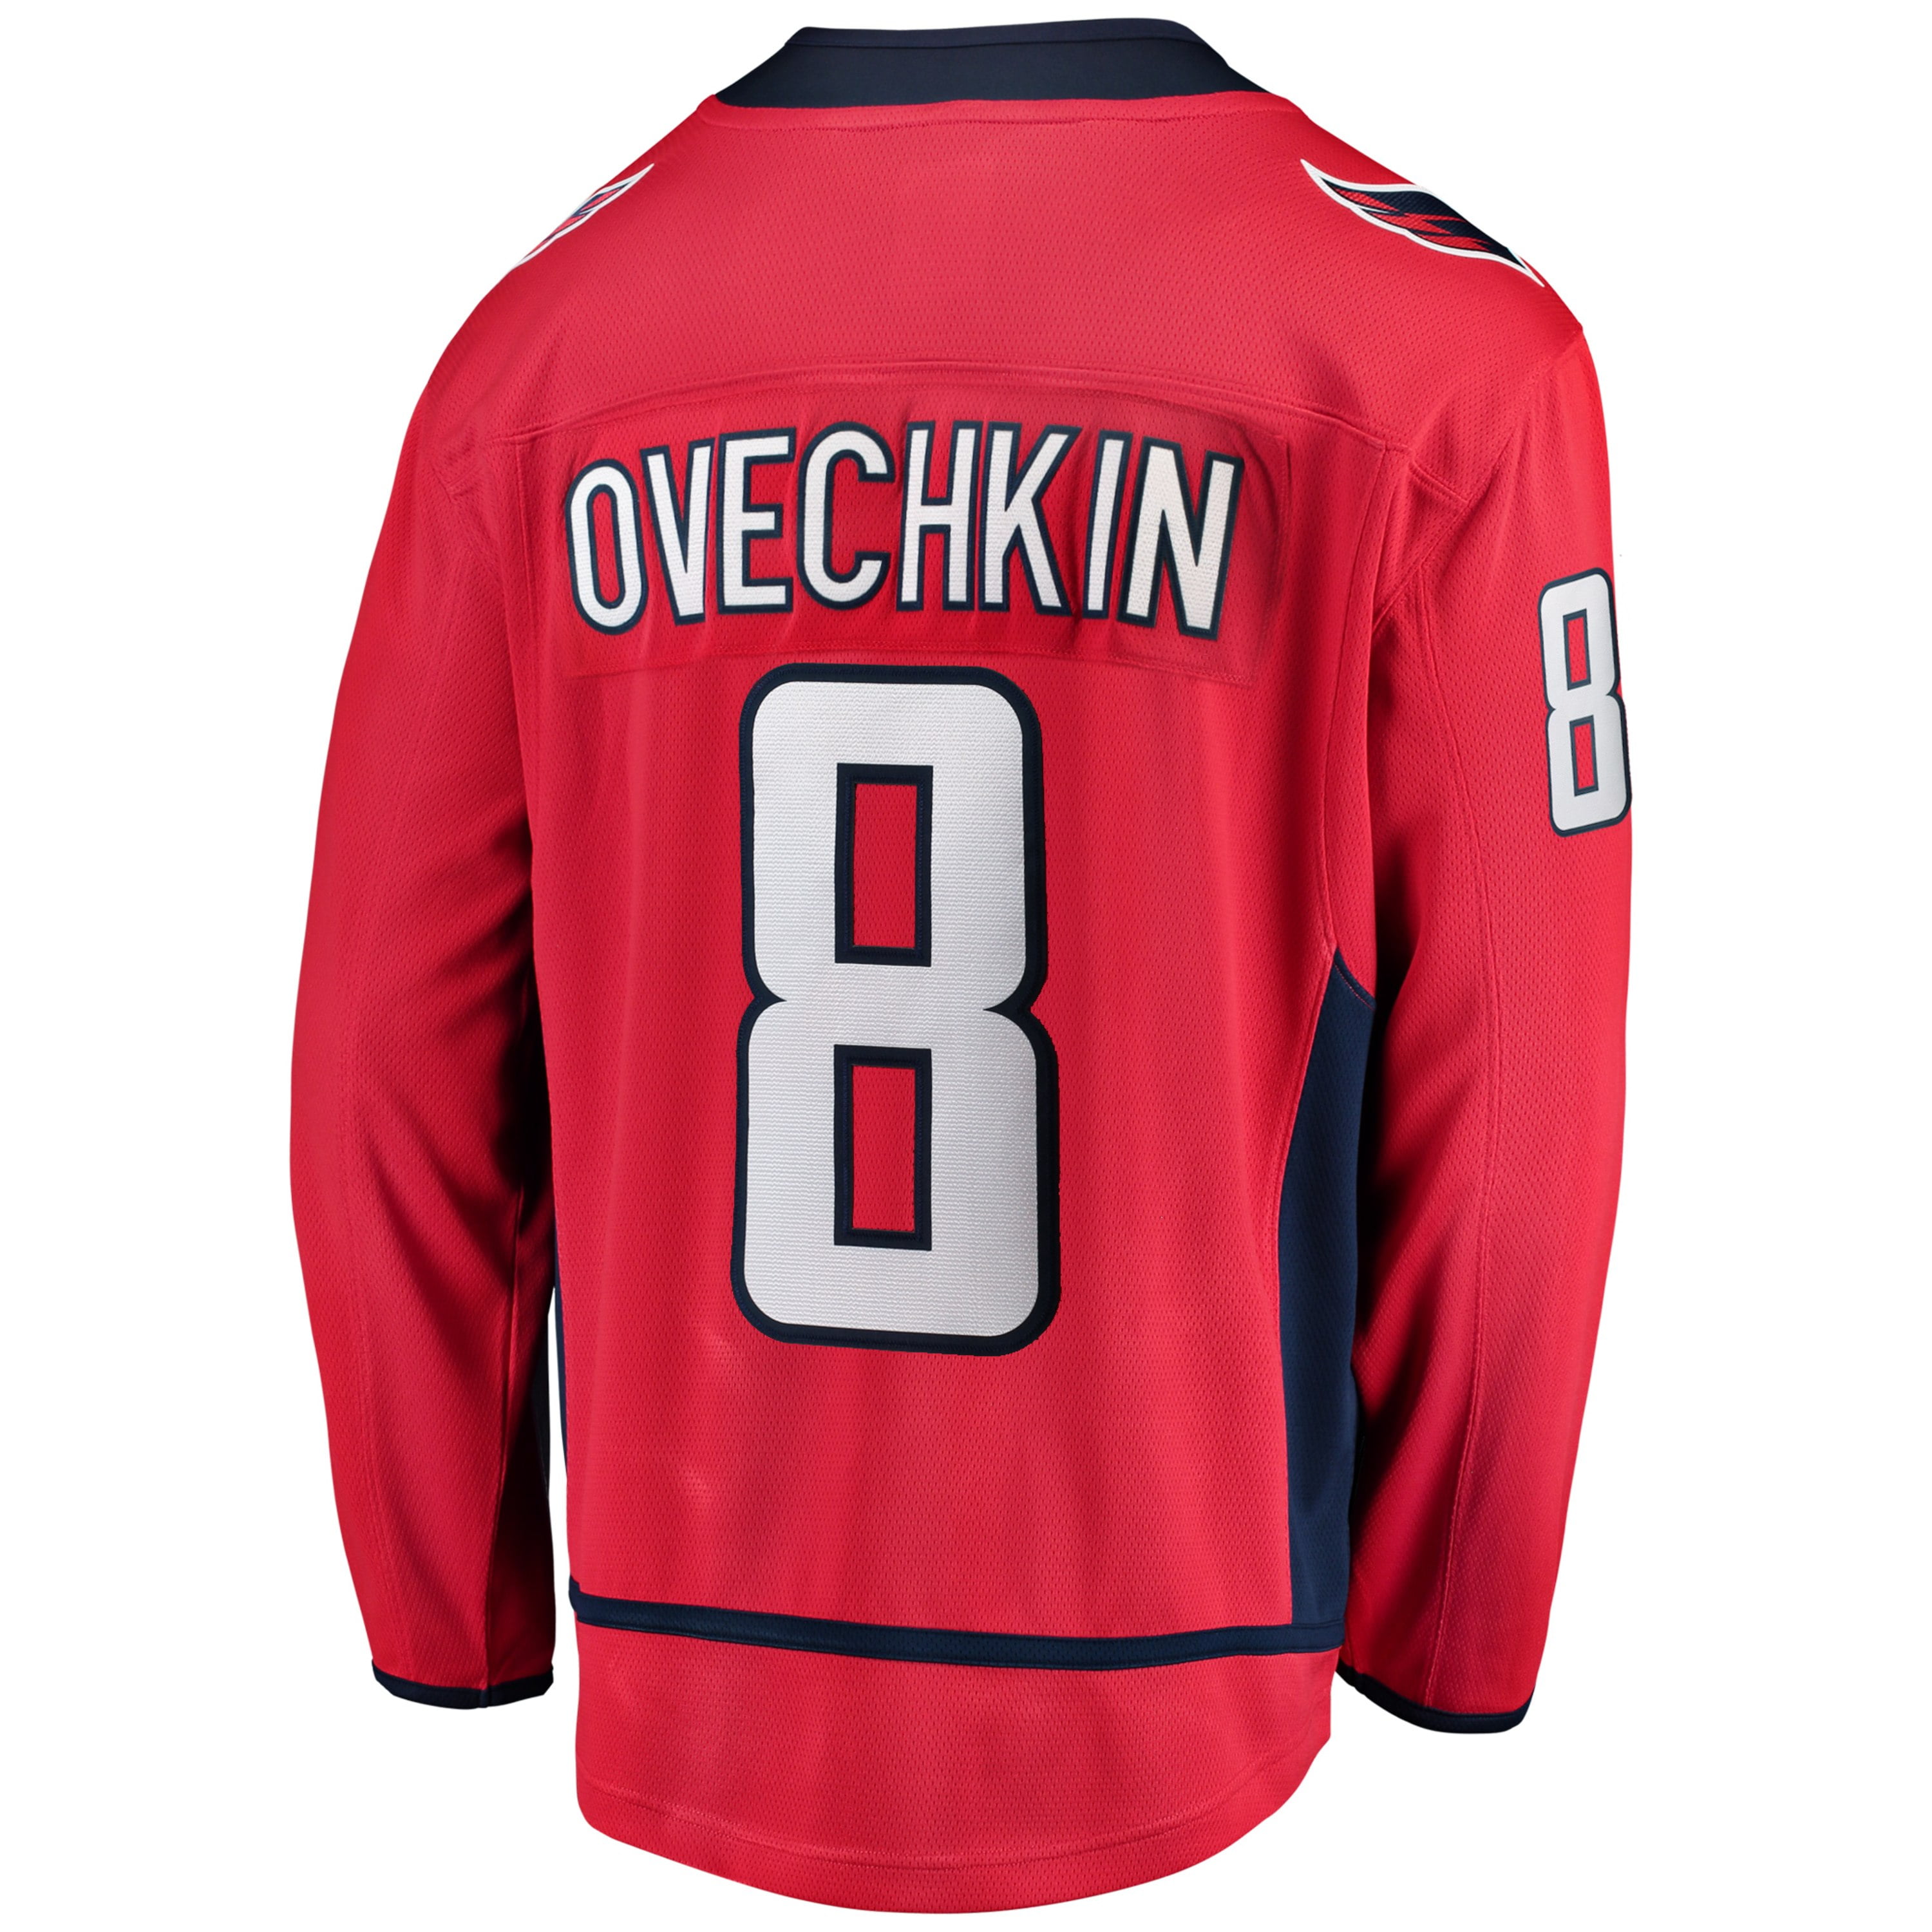 ovechkin home jersey